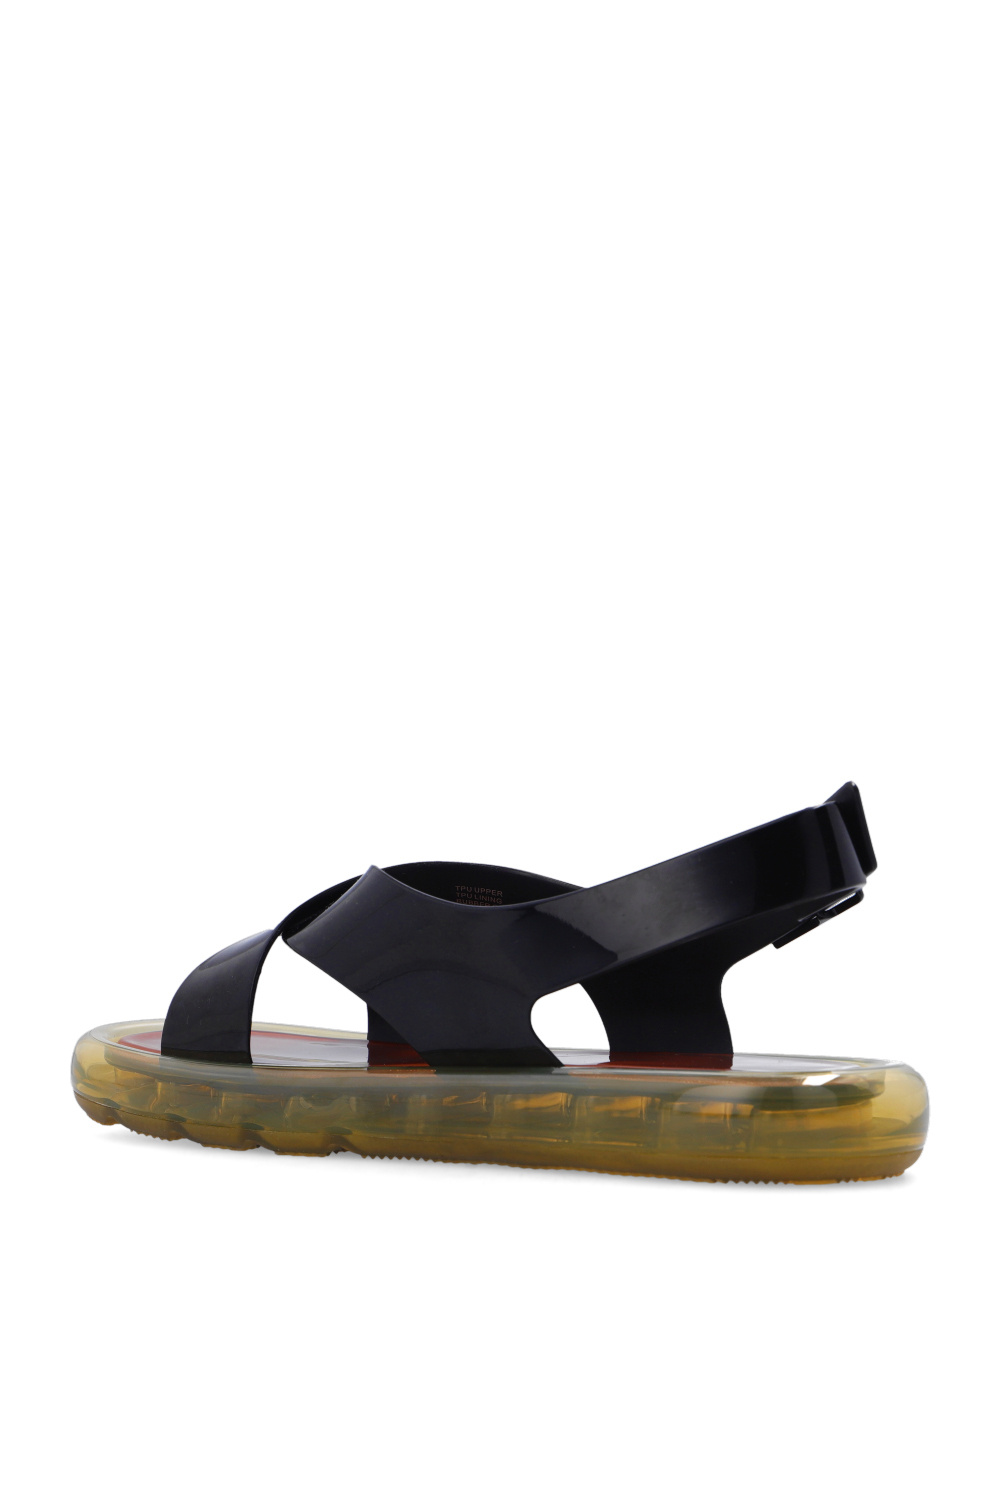 Bubble Jelly' rubber sandals Tory Burch - IetpShops Norway - Men's Clifton  8 Running Shoes